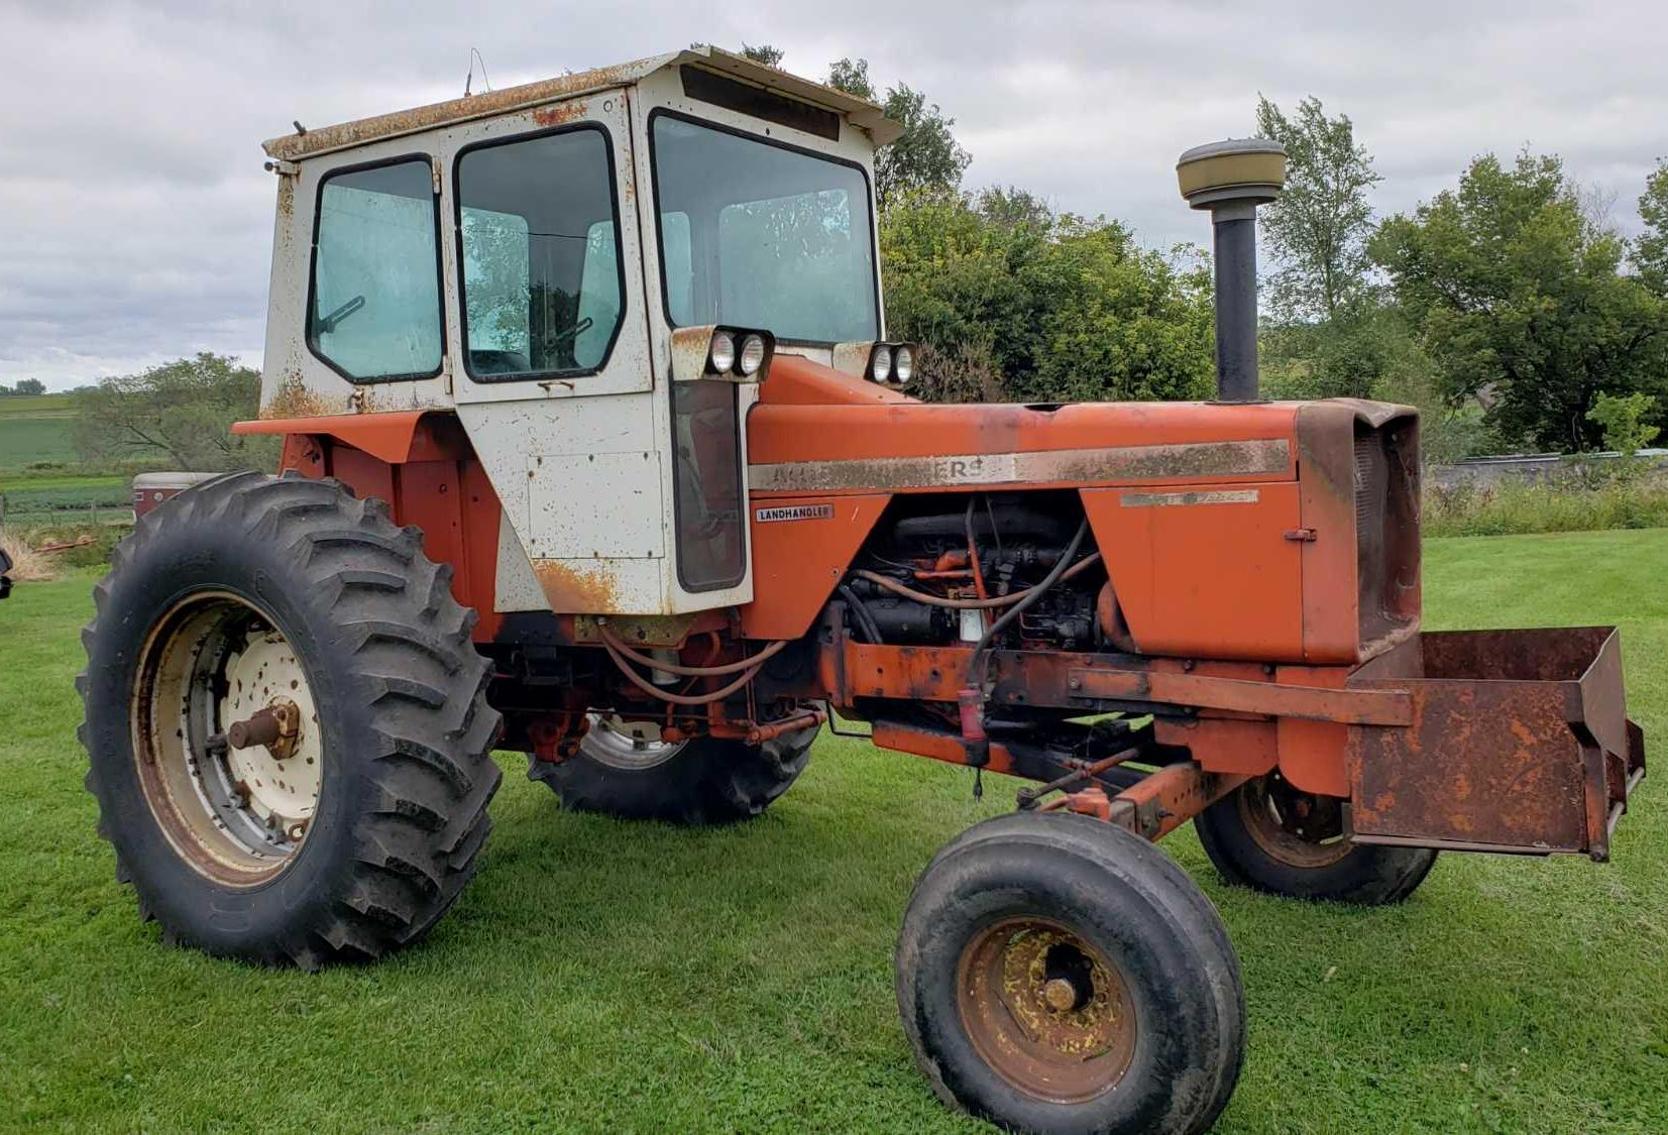 Larry Mueller and Others Farm Machinery, Vintage Equipment, Tools and More